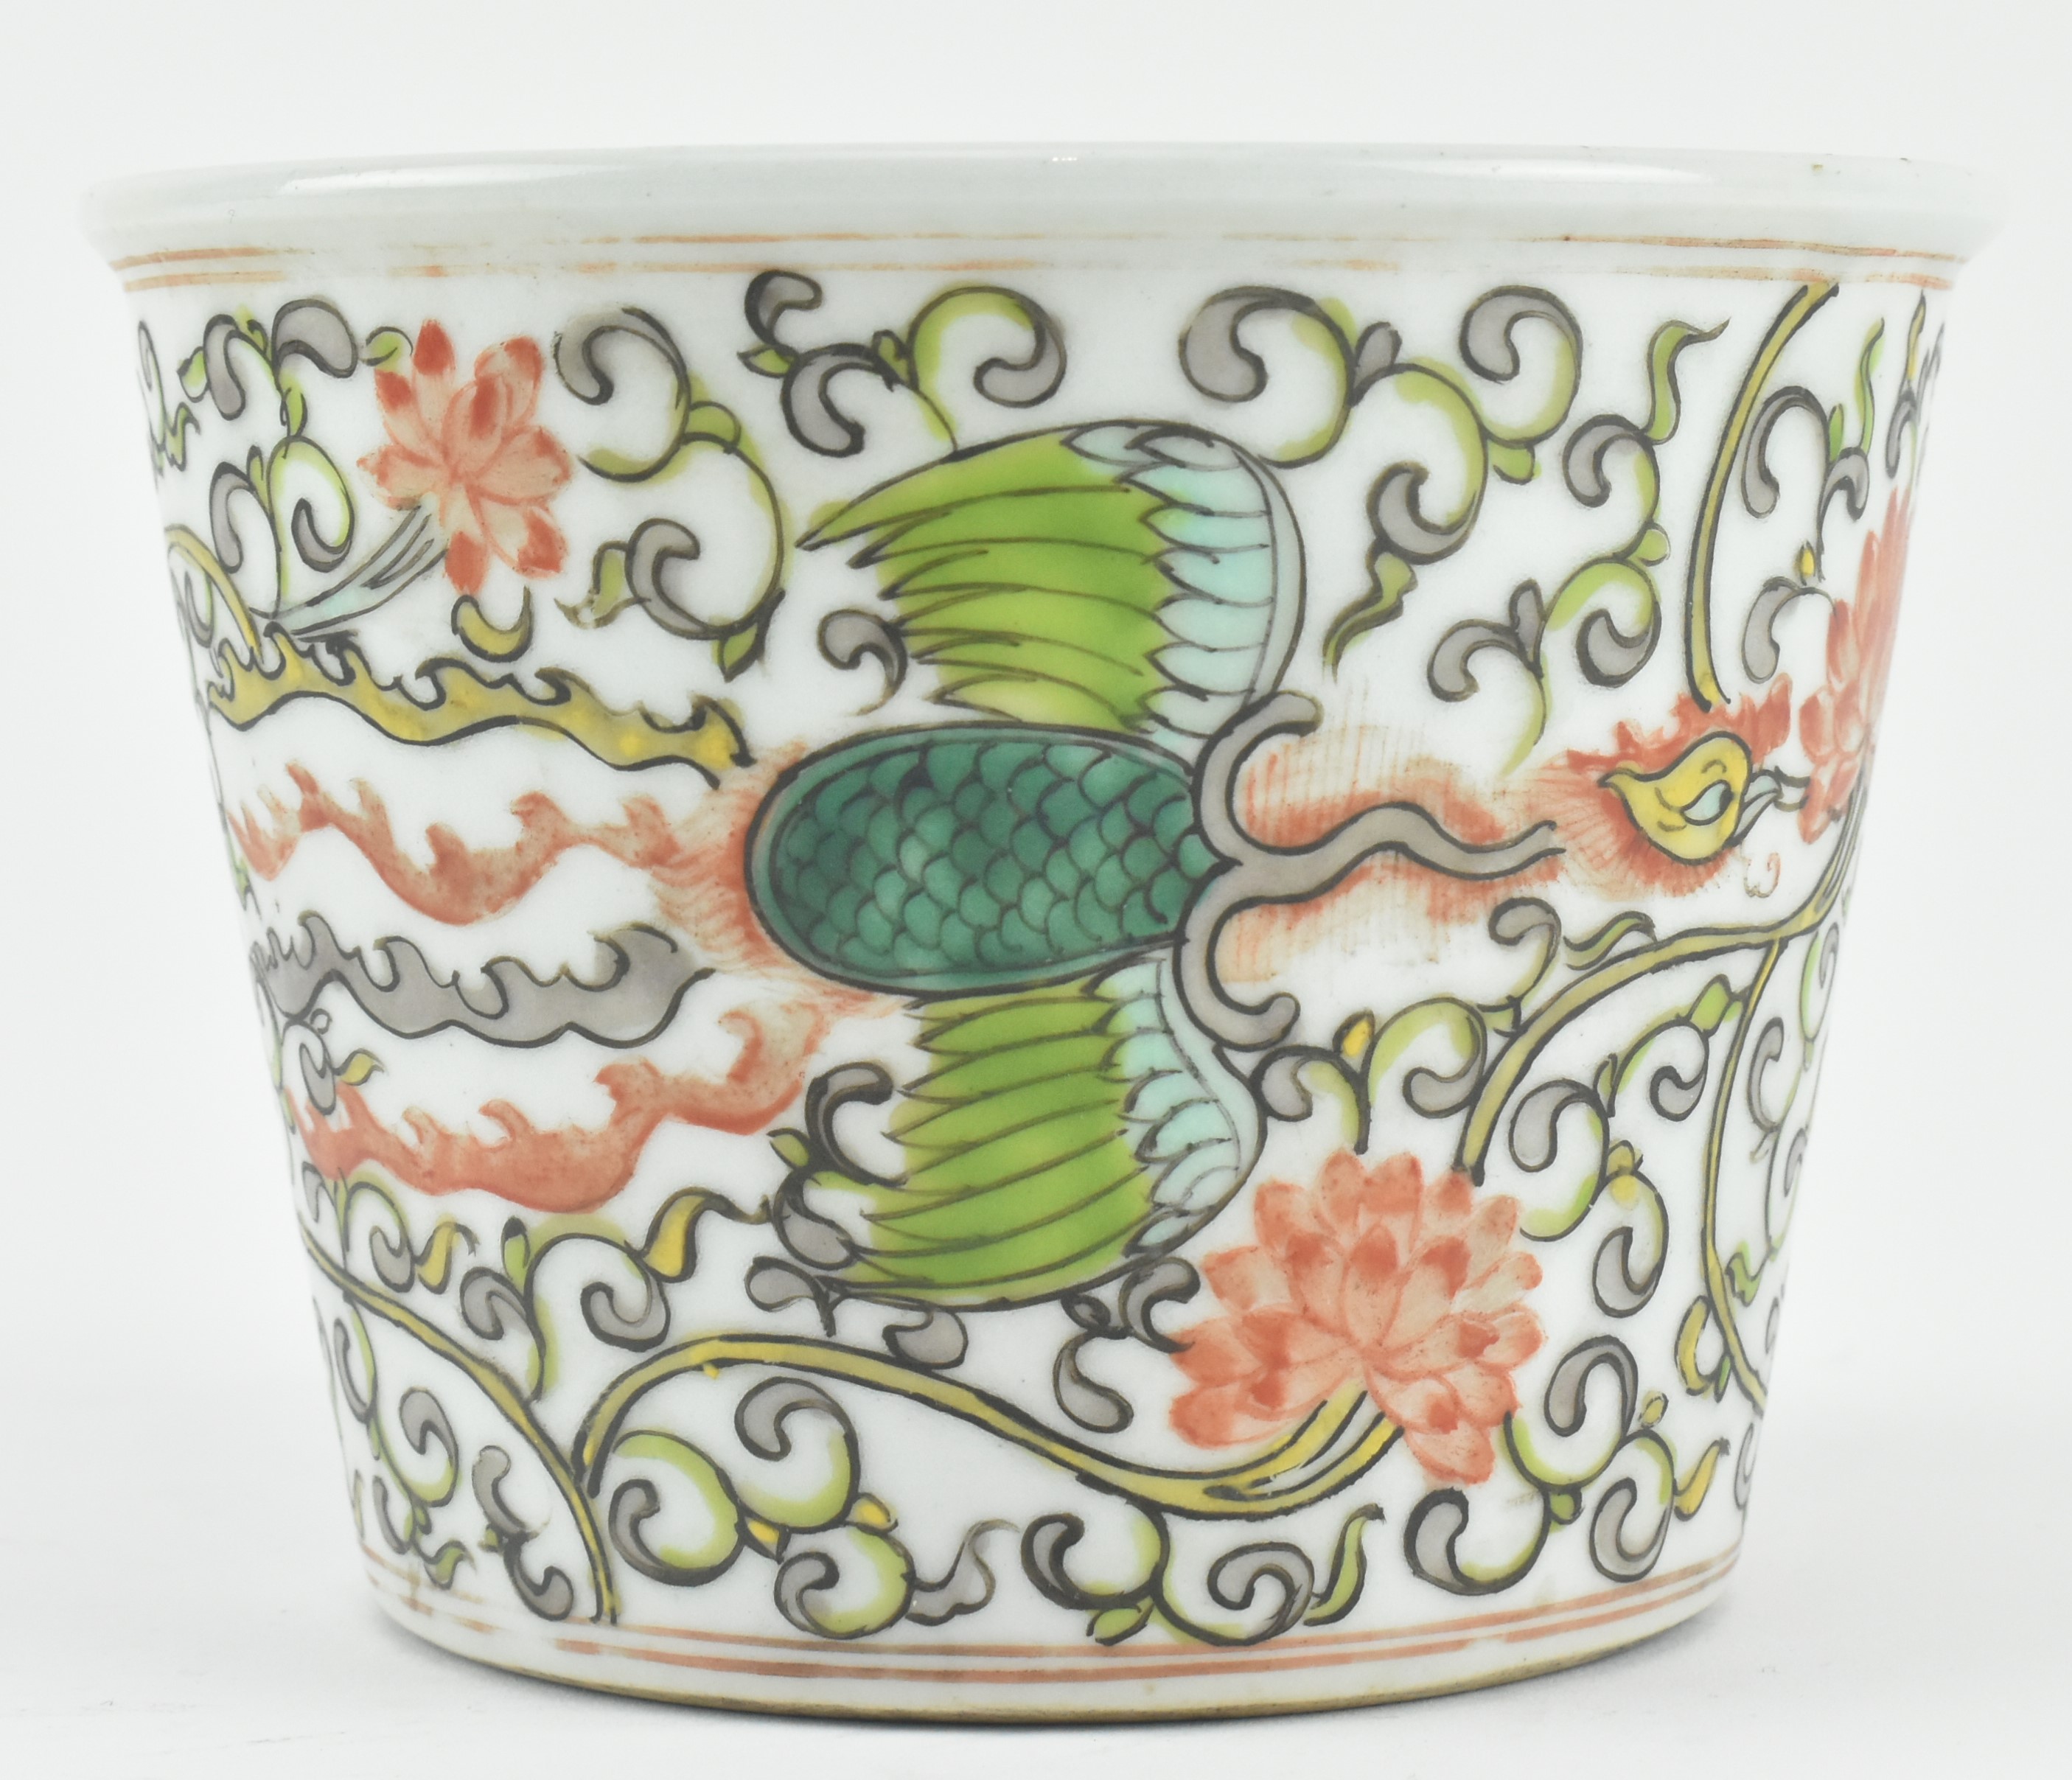 COLLECTION OF THREE JAPANESE CERAMIC PIECES 日本手绘陶瓷三件 - Image 10 of 12